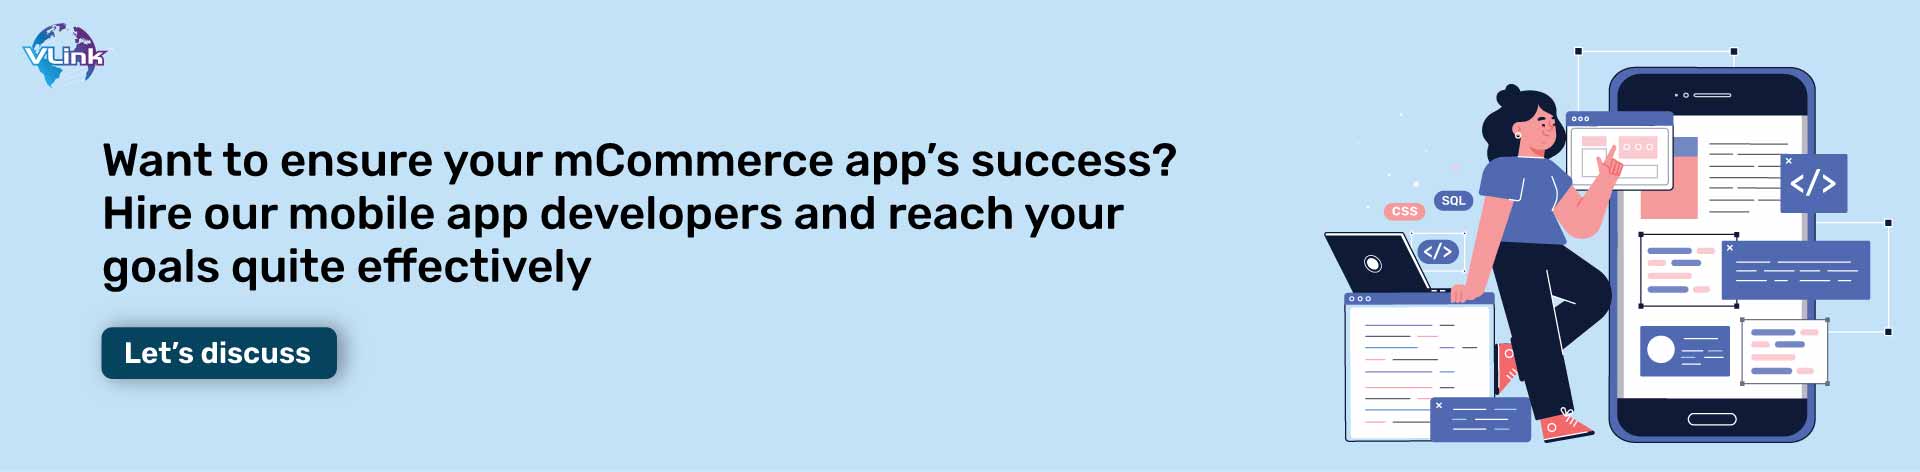 build-and-secure-m-commerce-mobile-app-cta